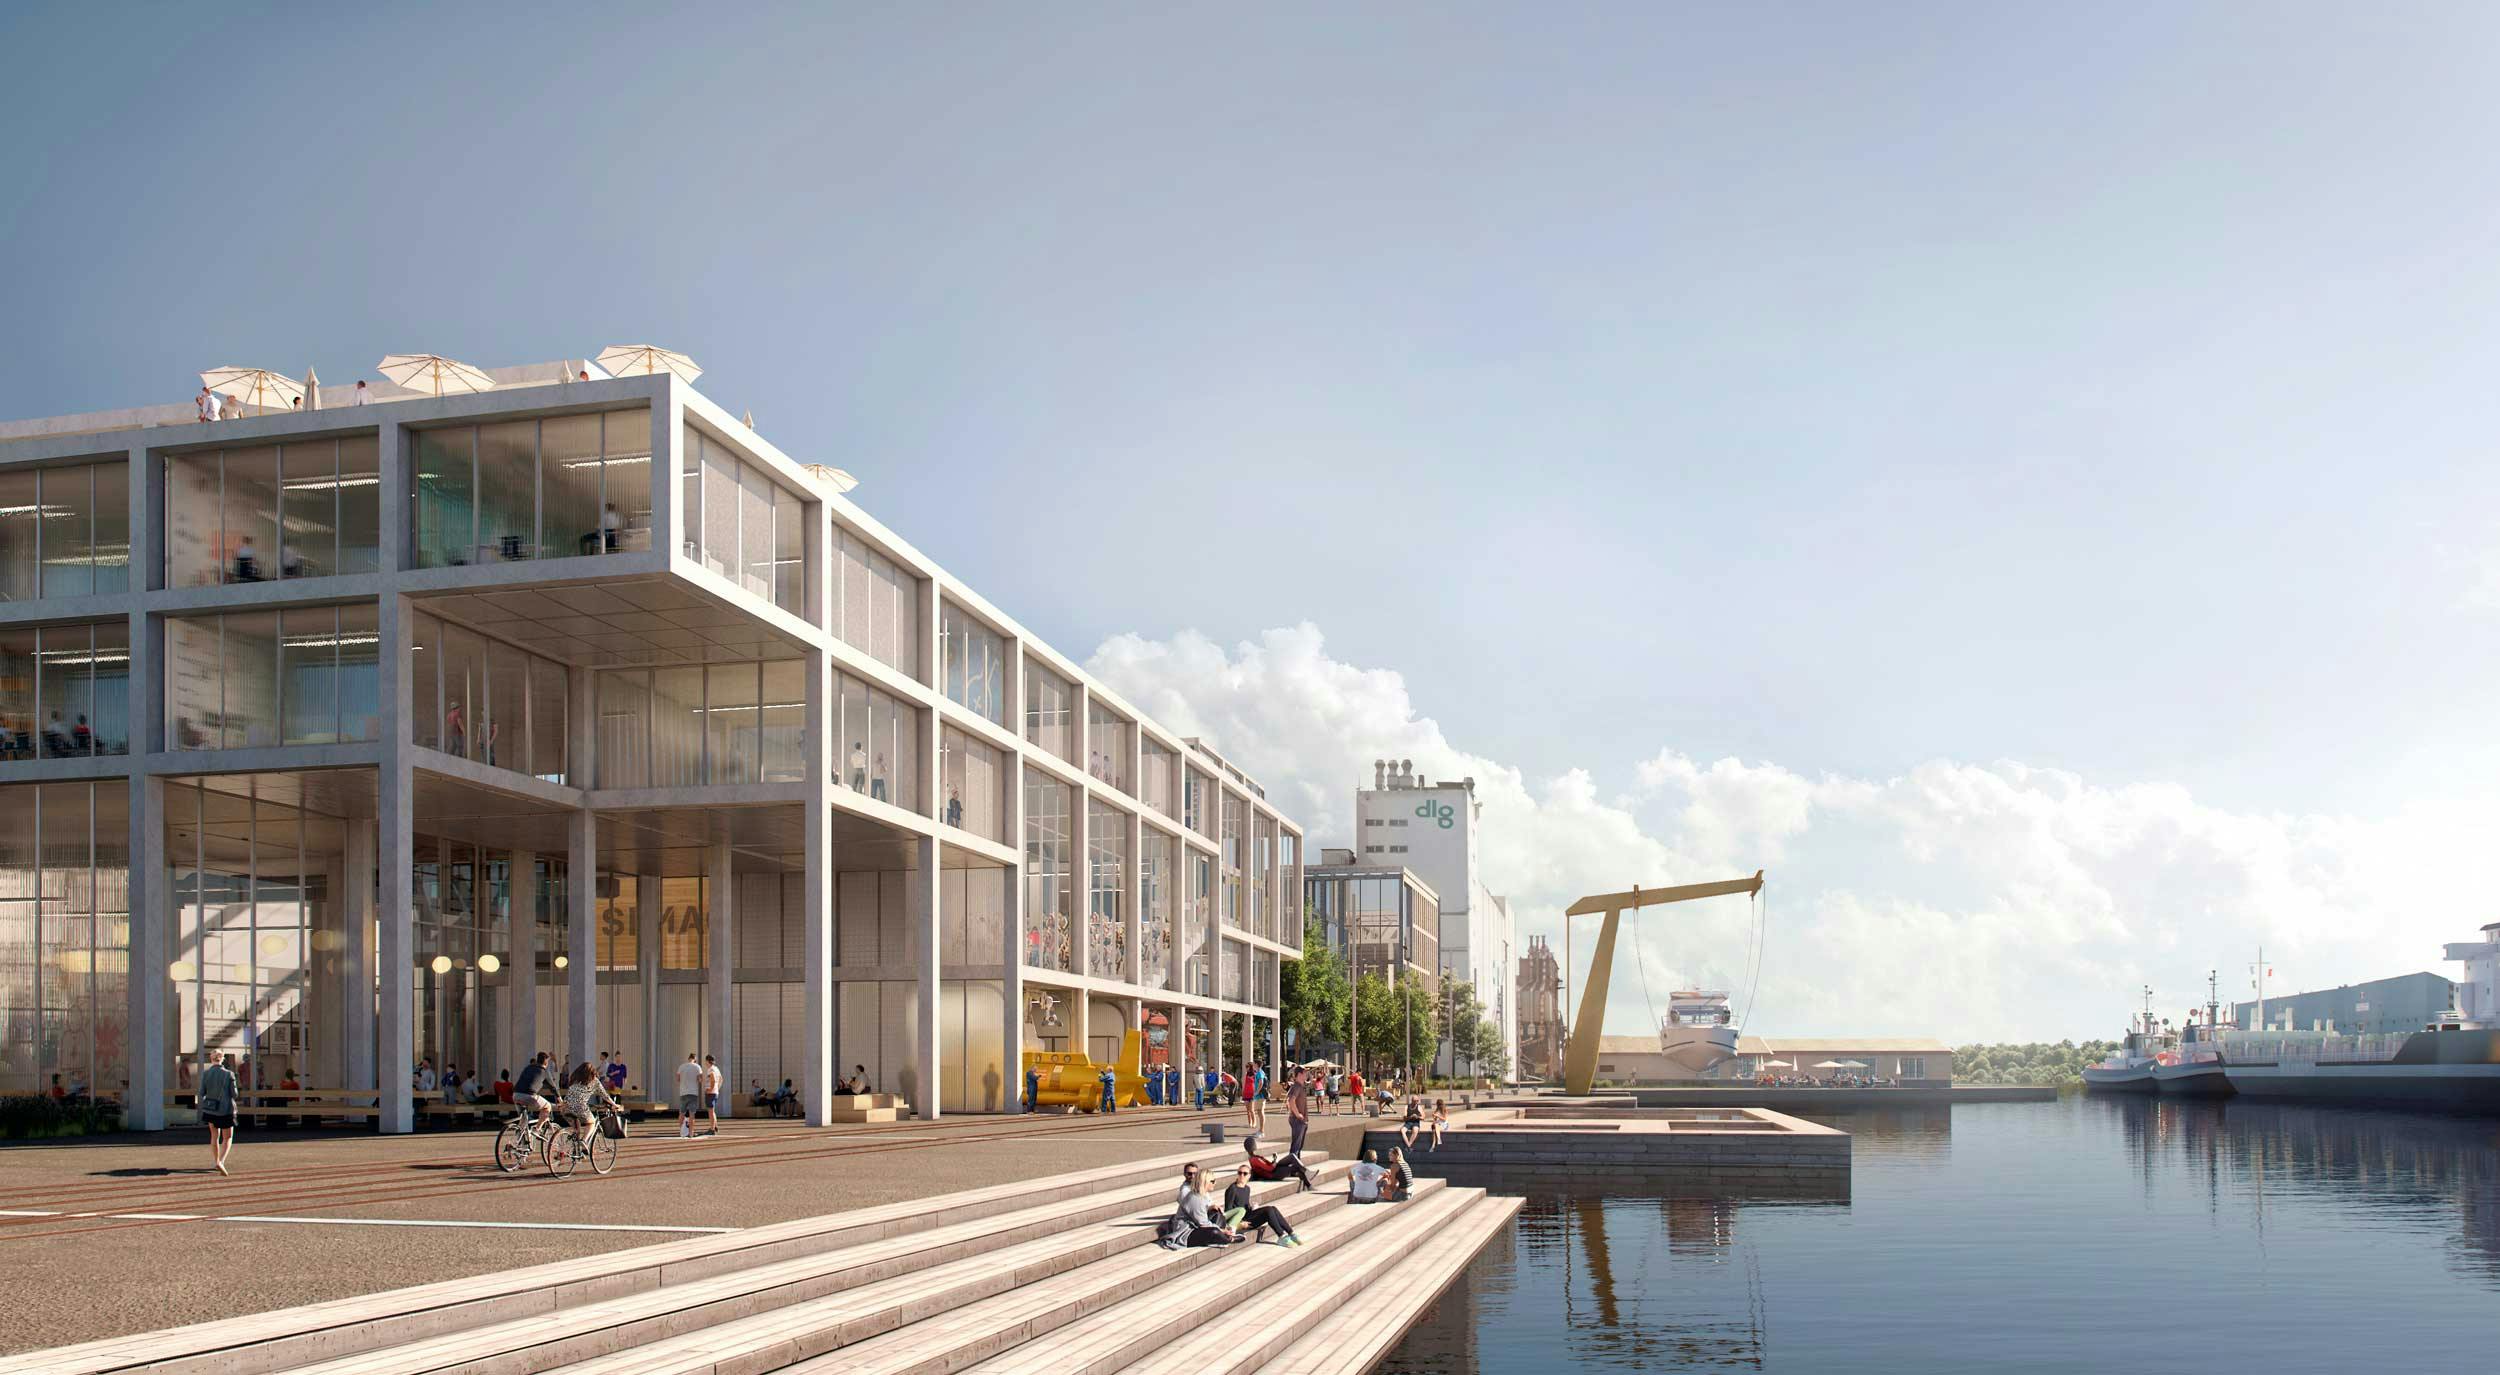 The new SIMAC - view from the quay